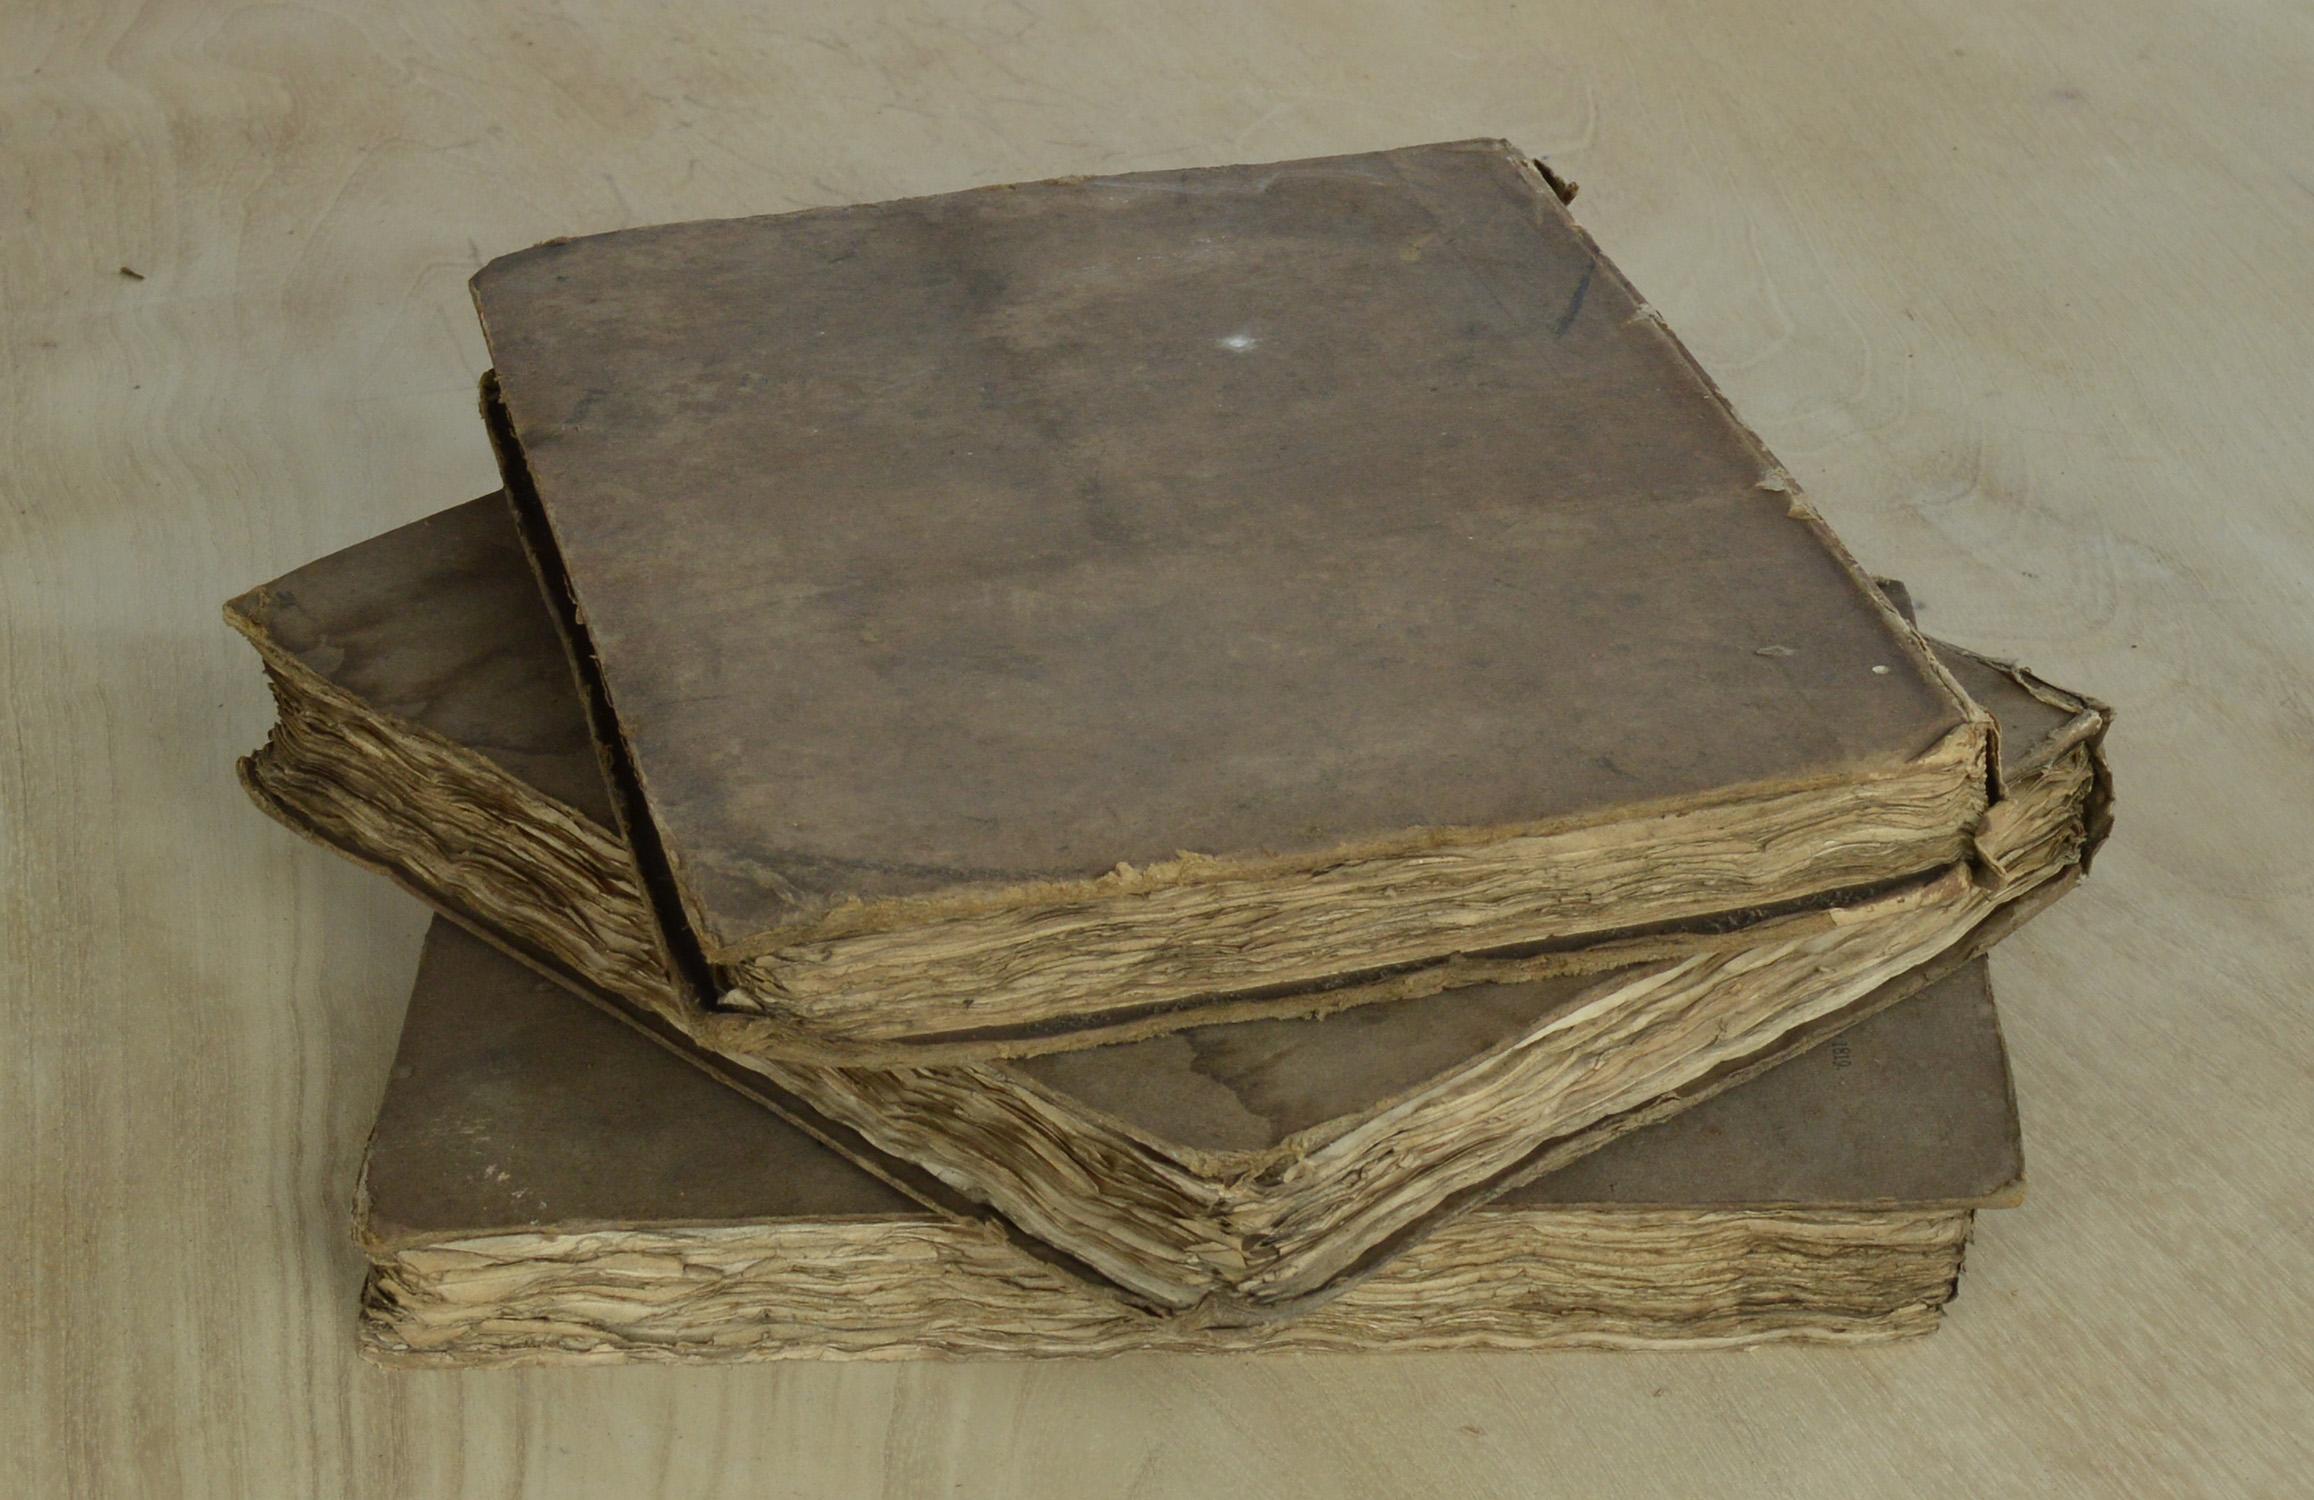 Set of 3 Antique Early 19th Century Distressed Books with Earth Colour Bindings (Englisch)